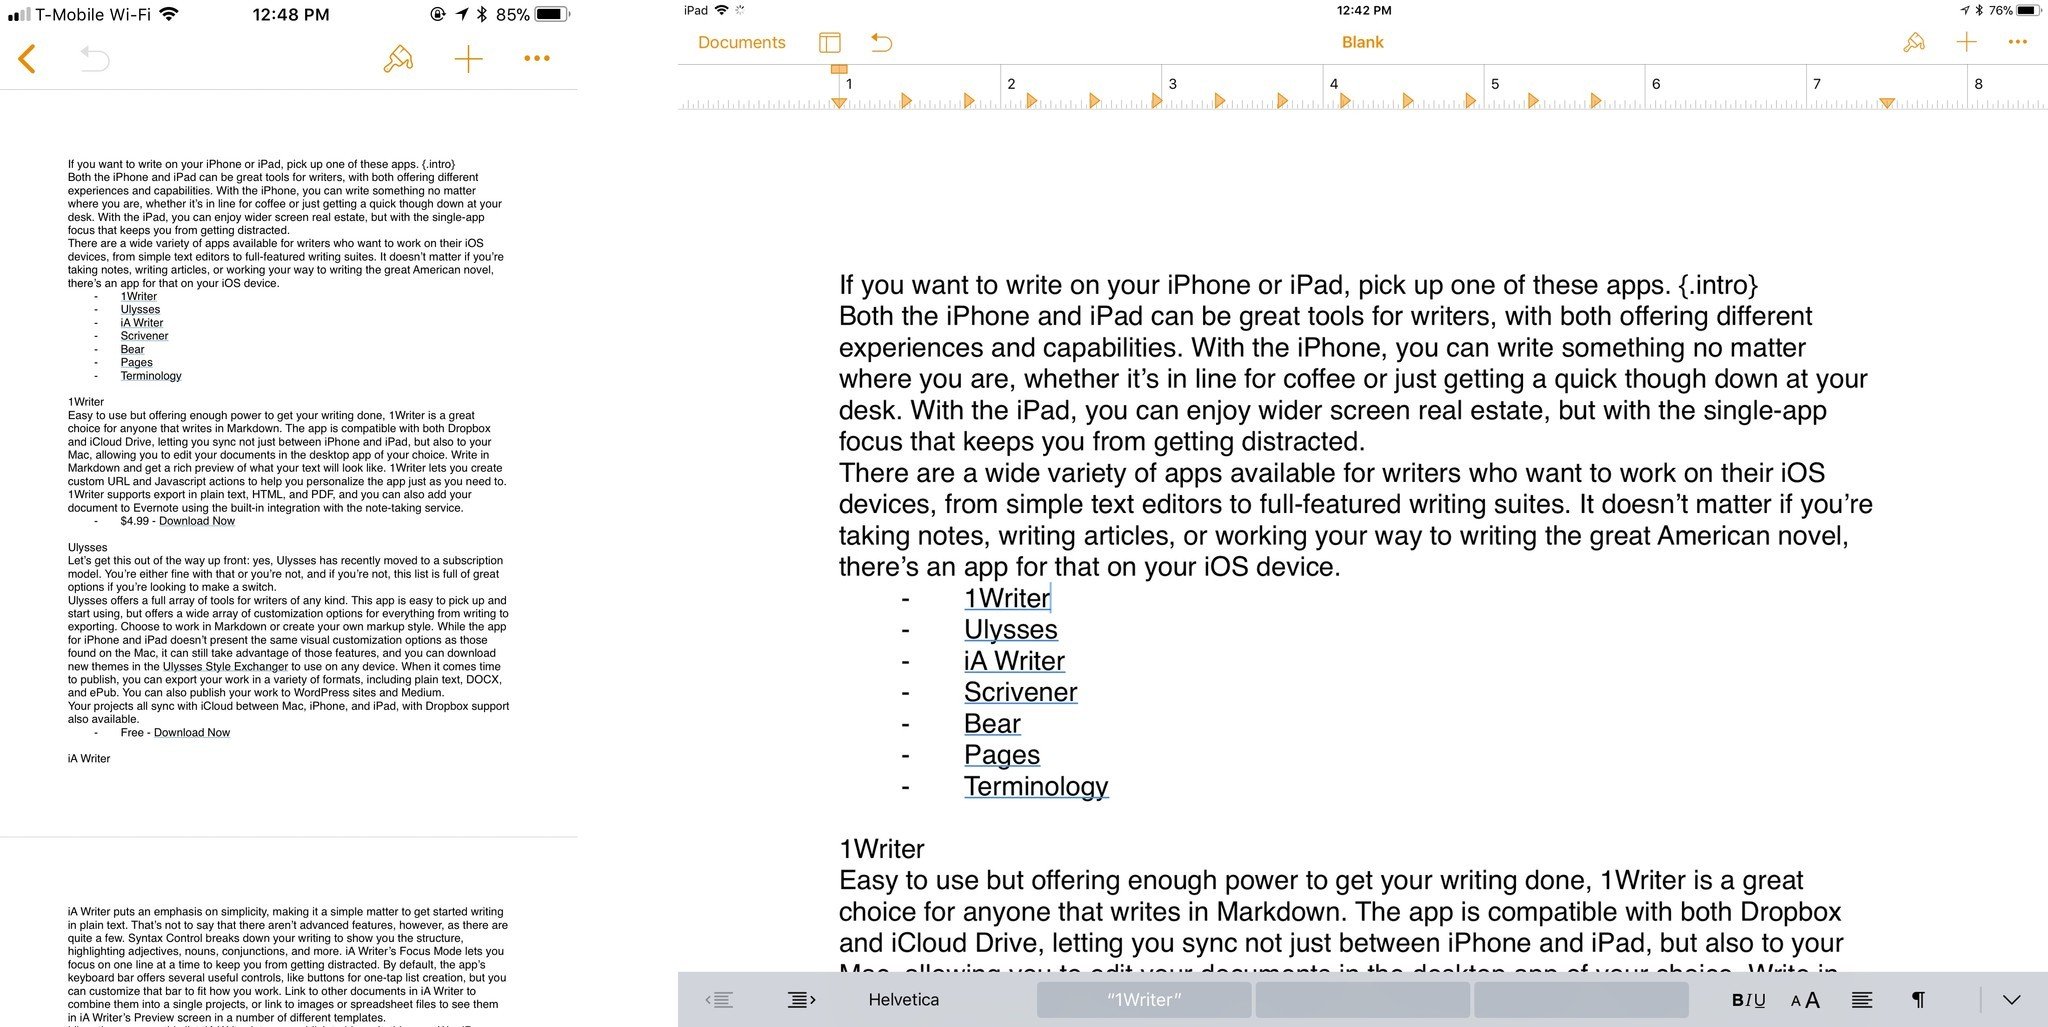 Iphone research paper